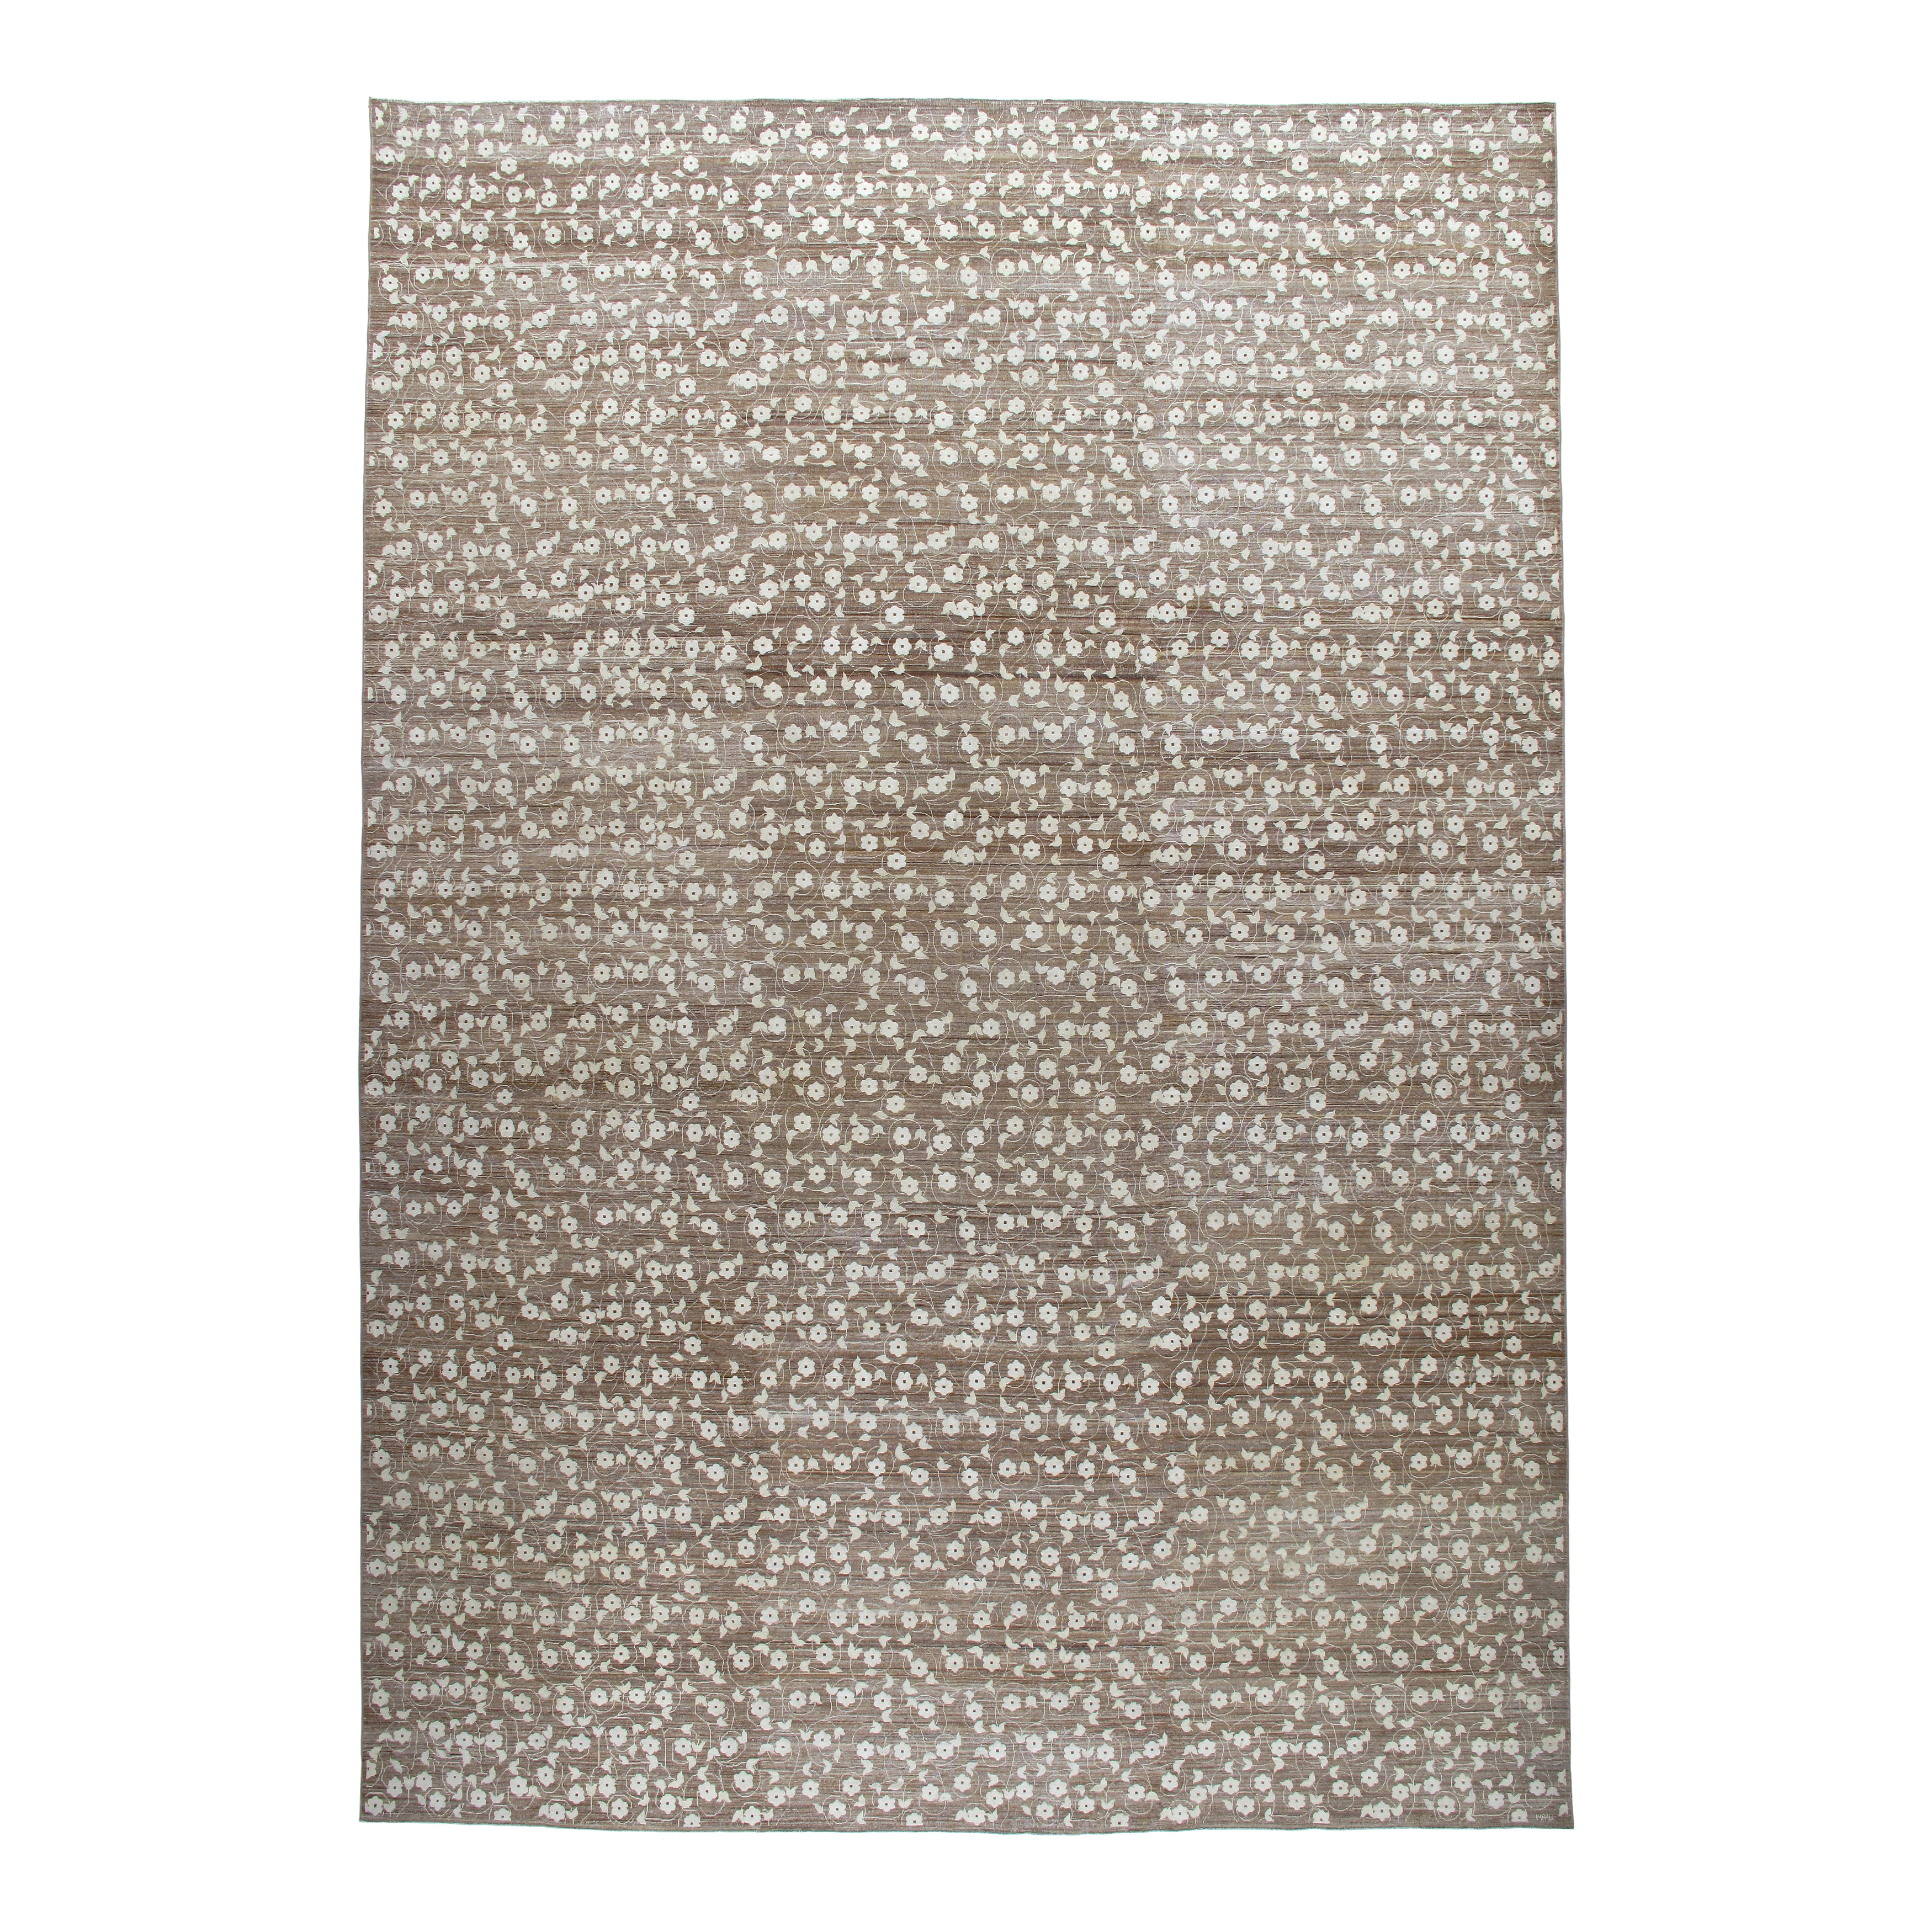 Our Floral rug is handknotted from the finest hand-carded, hand-spun, naturally dyed wool.